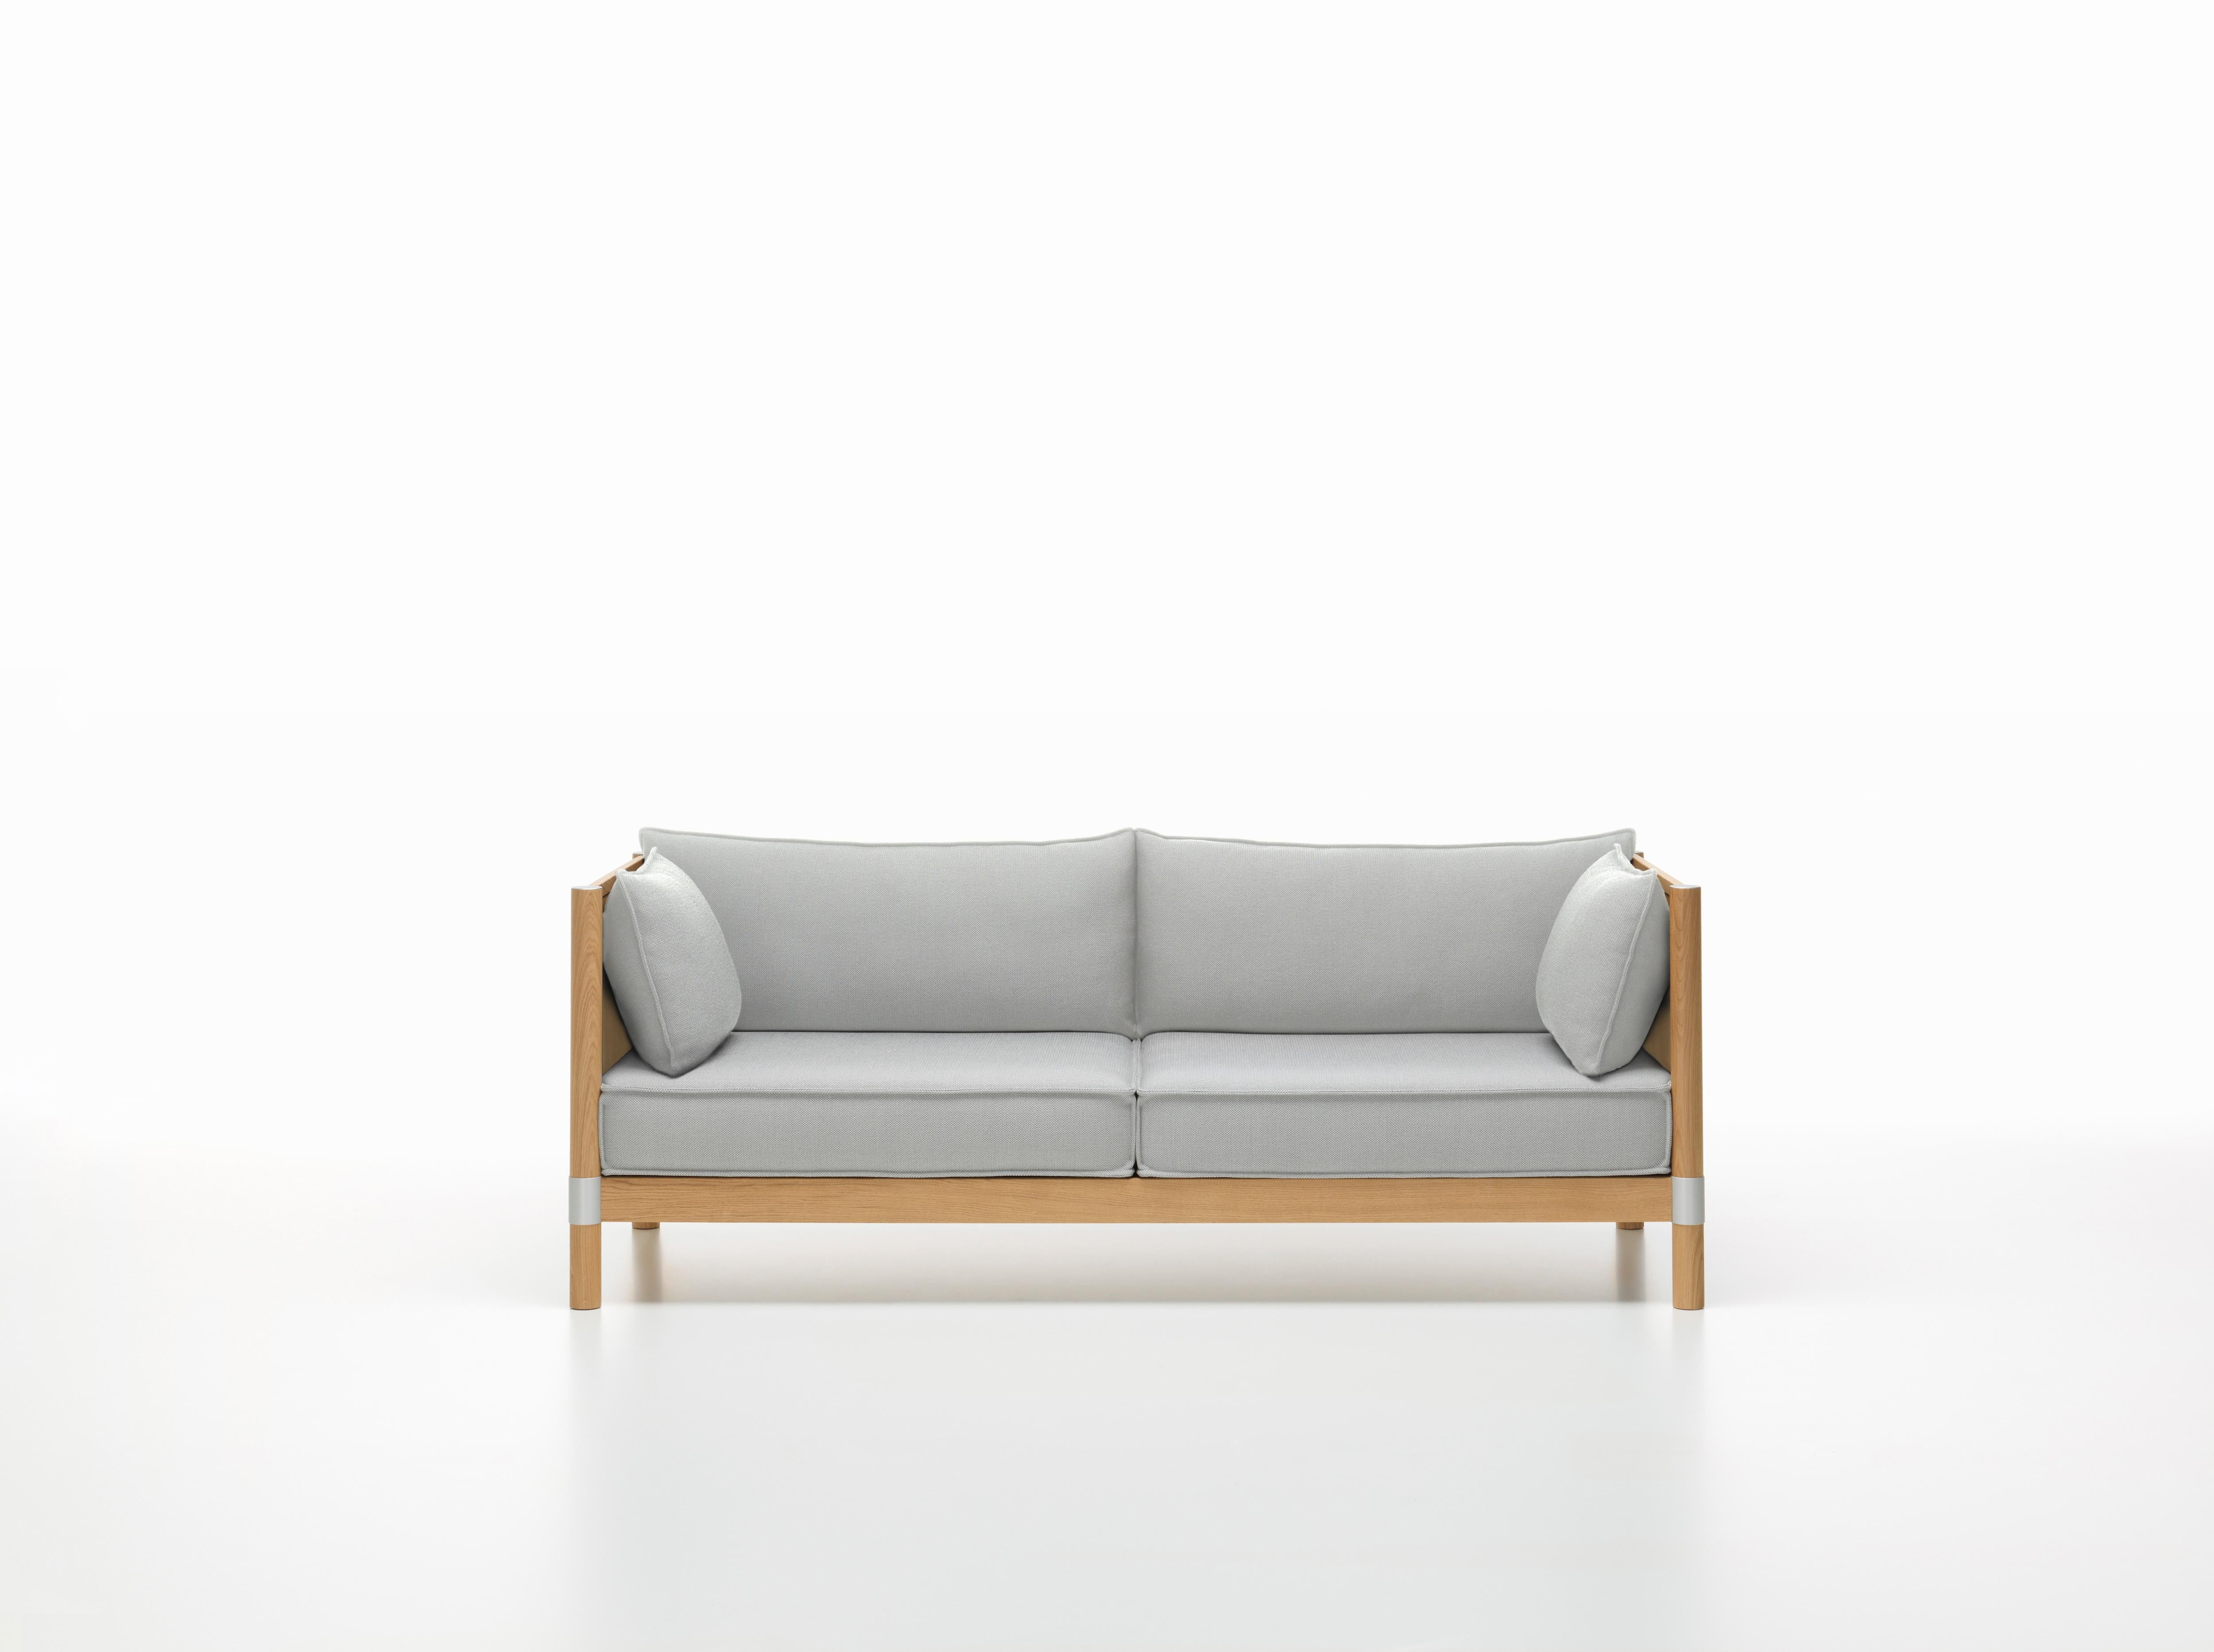 These products are only available in the United States.

The clean-lined aesthetic of Cyl Sofa, with its smooth planes, orthogonal frame and cylindrical supports, is emphasized by components made of solid wood. This makes it an ideal piece for